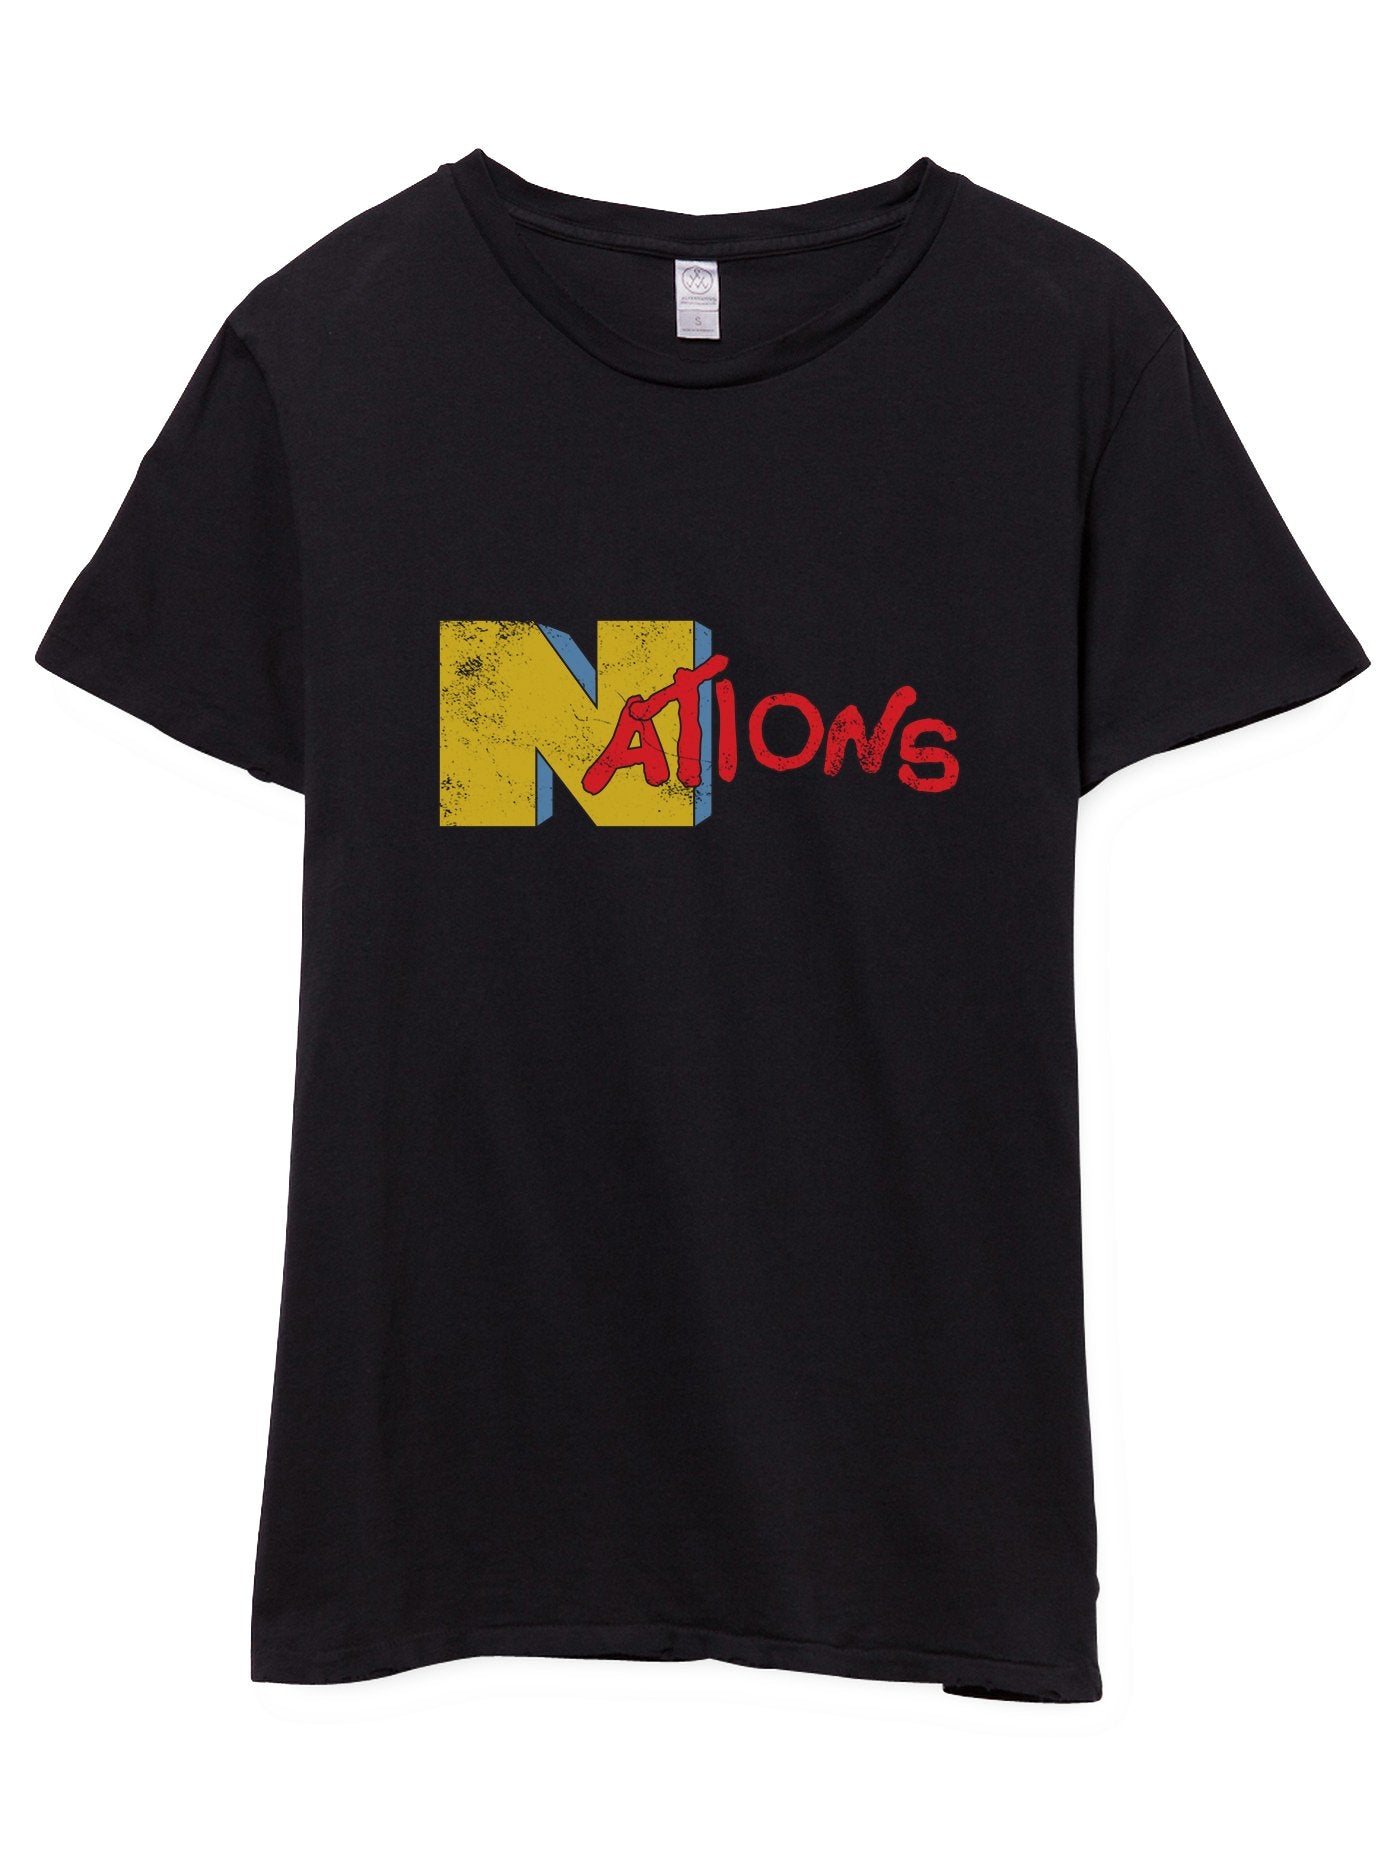 Nations NationsTV Tee - We Are Nations